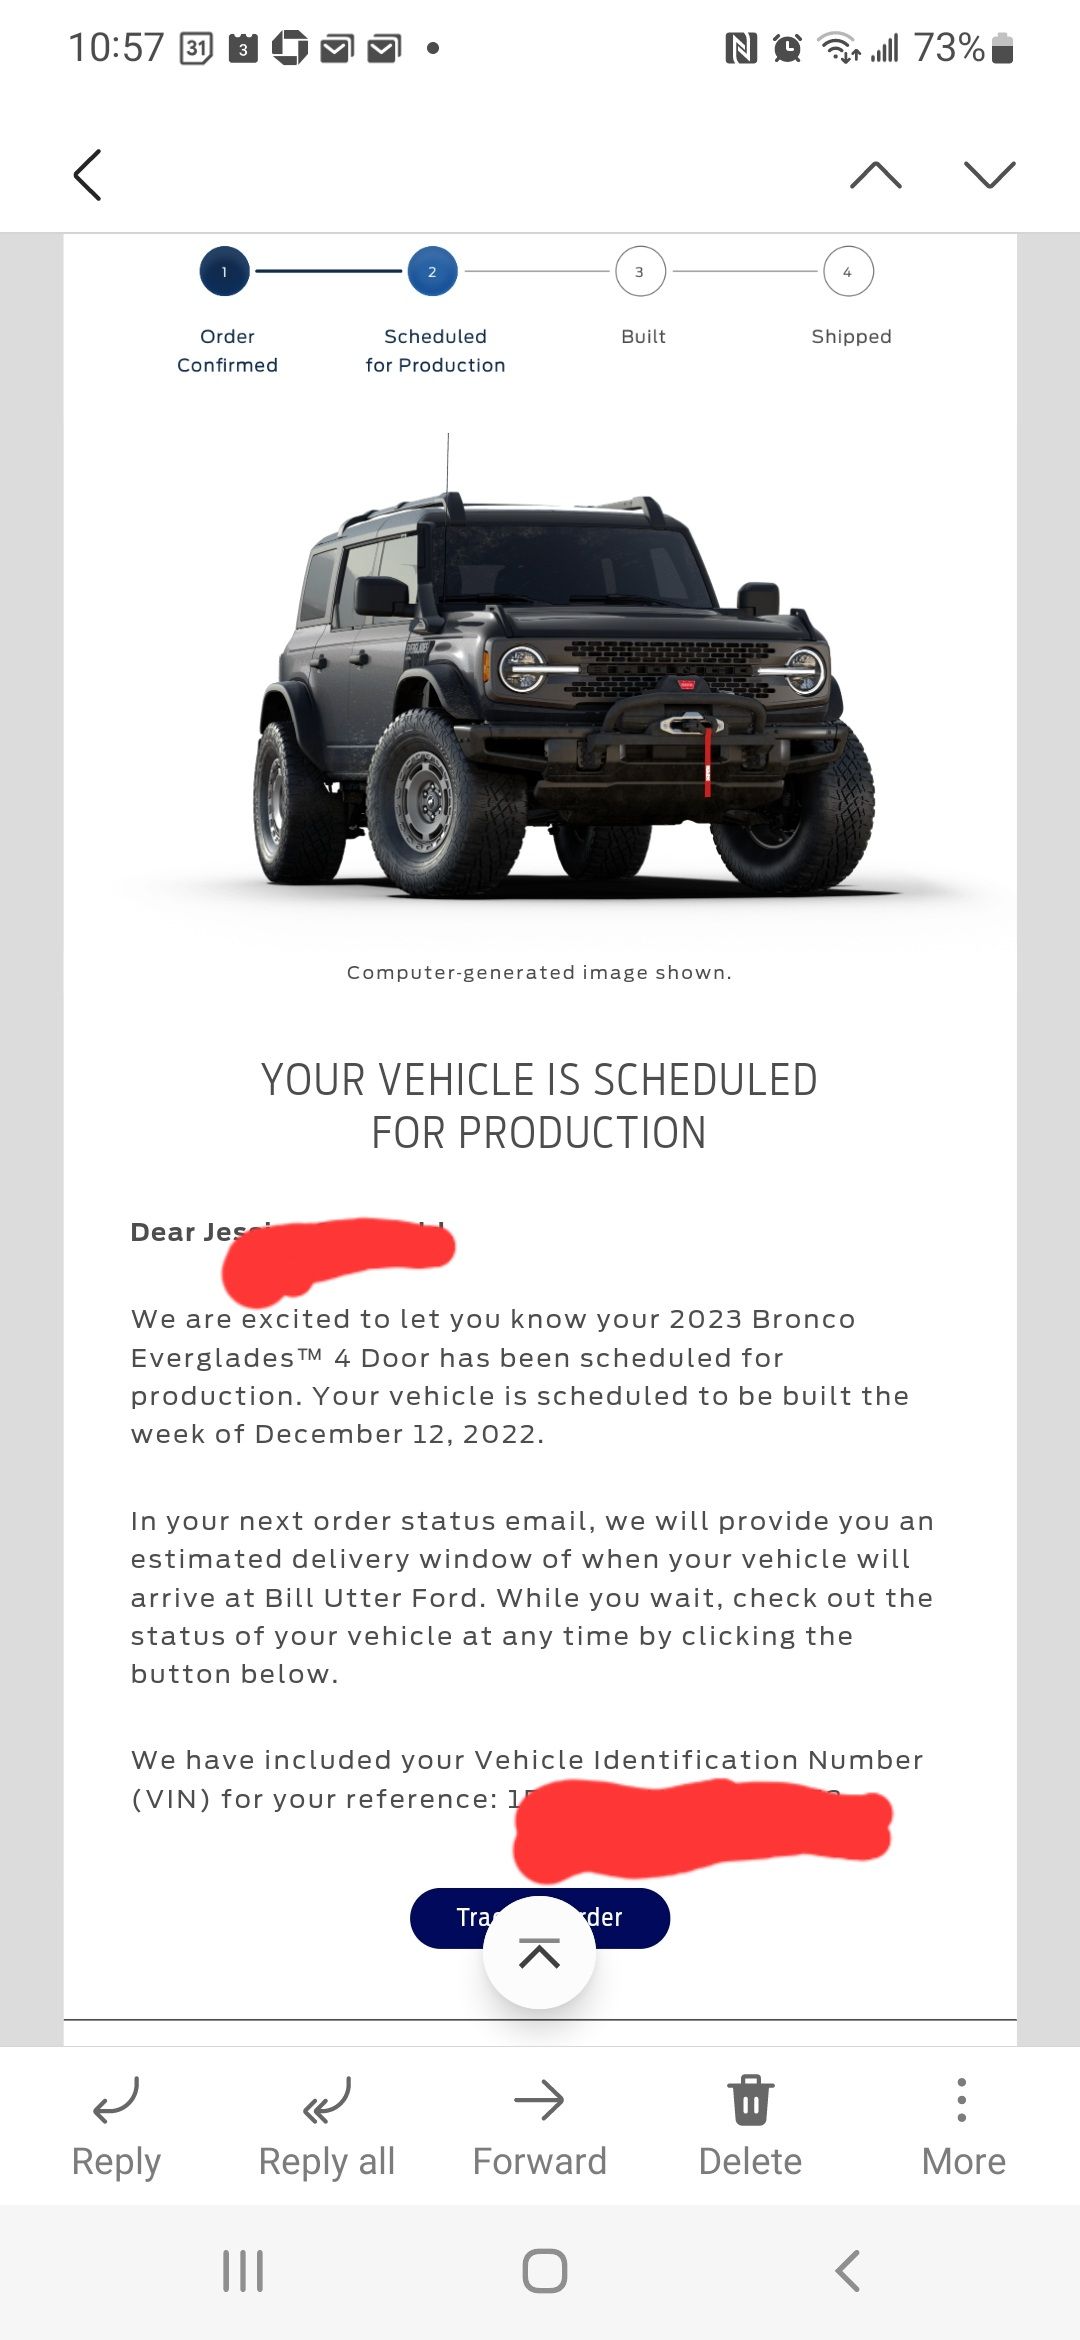 Finally scheduled for production! - Bronco Nation